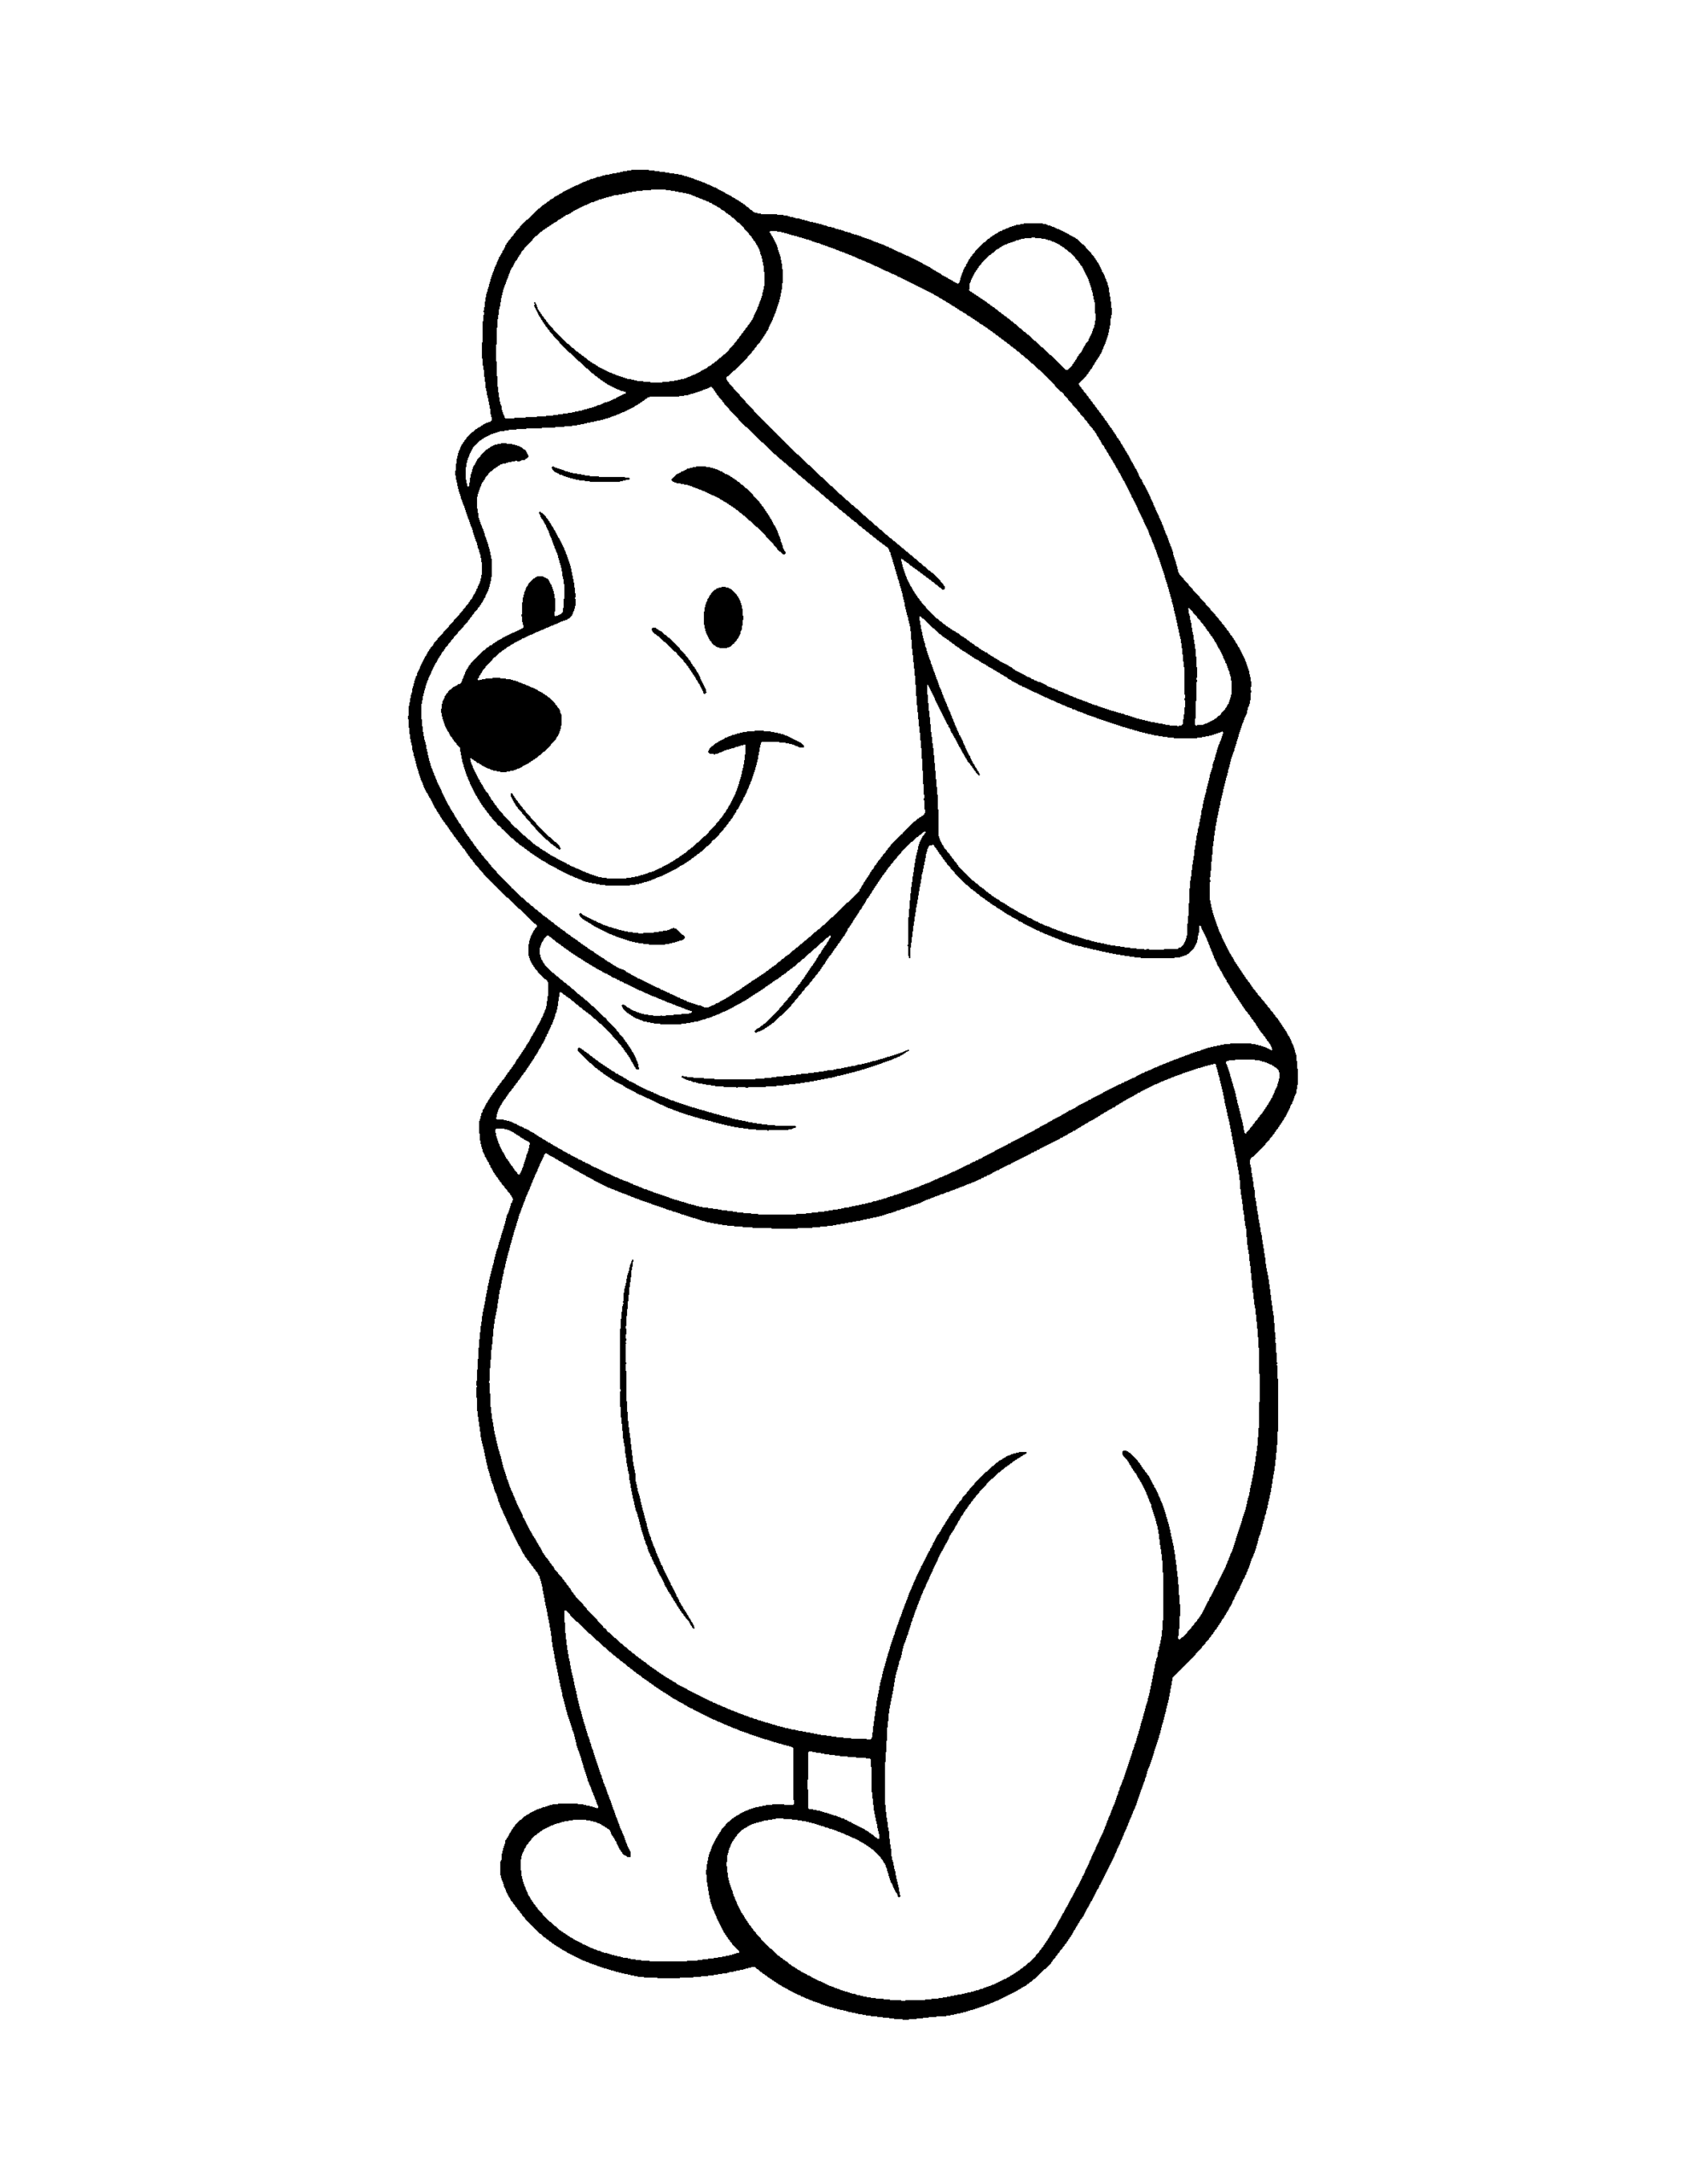 Winnie the Pooh Coloring Pages Cartoons Winnie The Pooh Baby Printable 2020 6942 Coloring4free